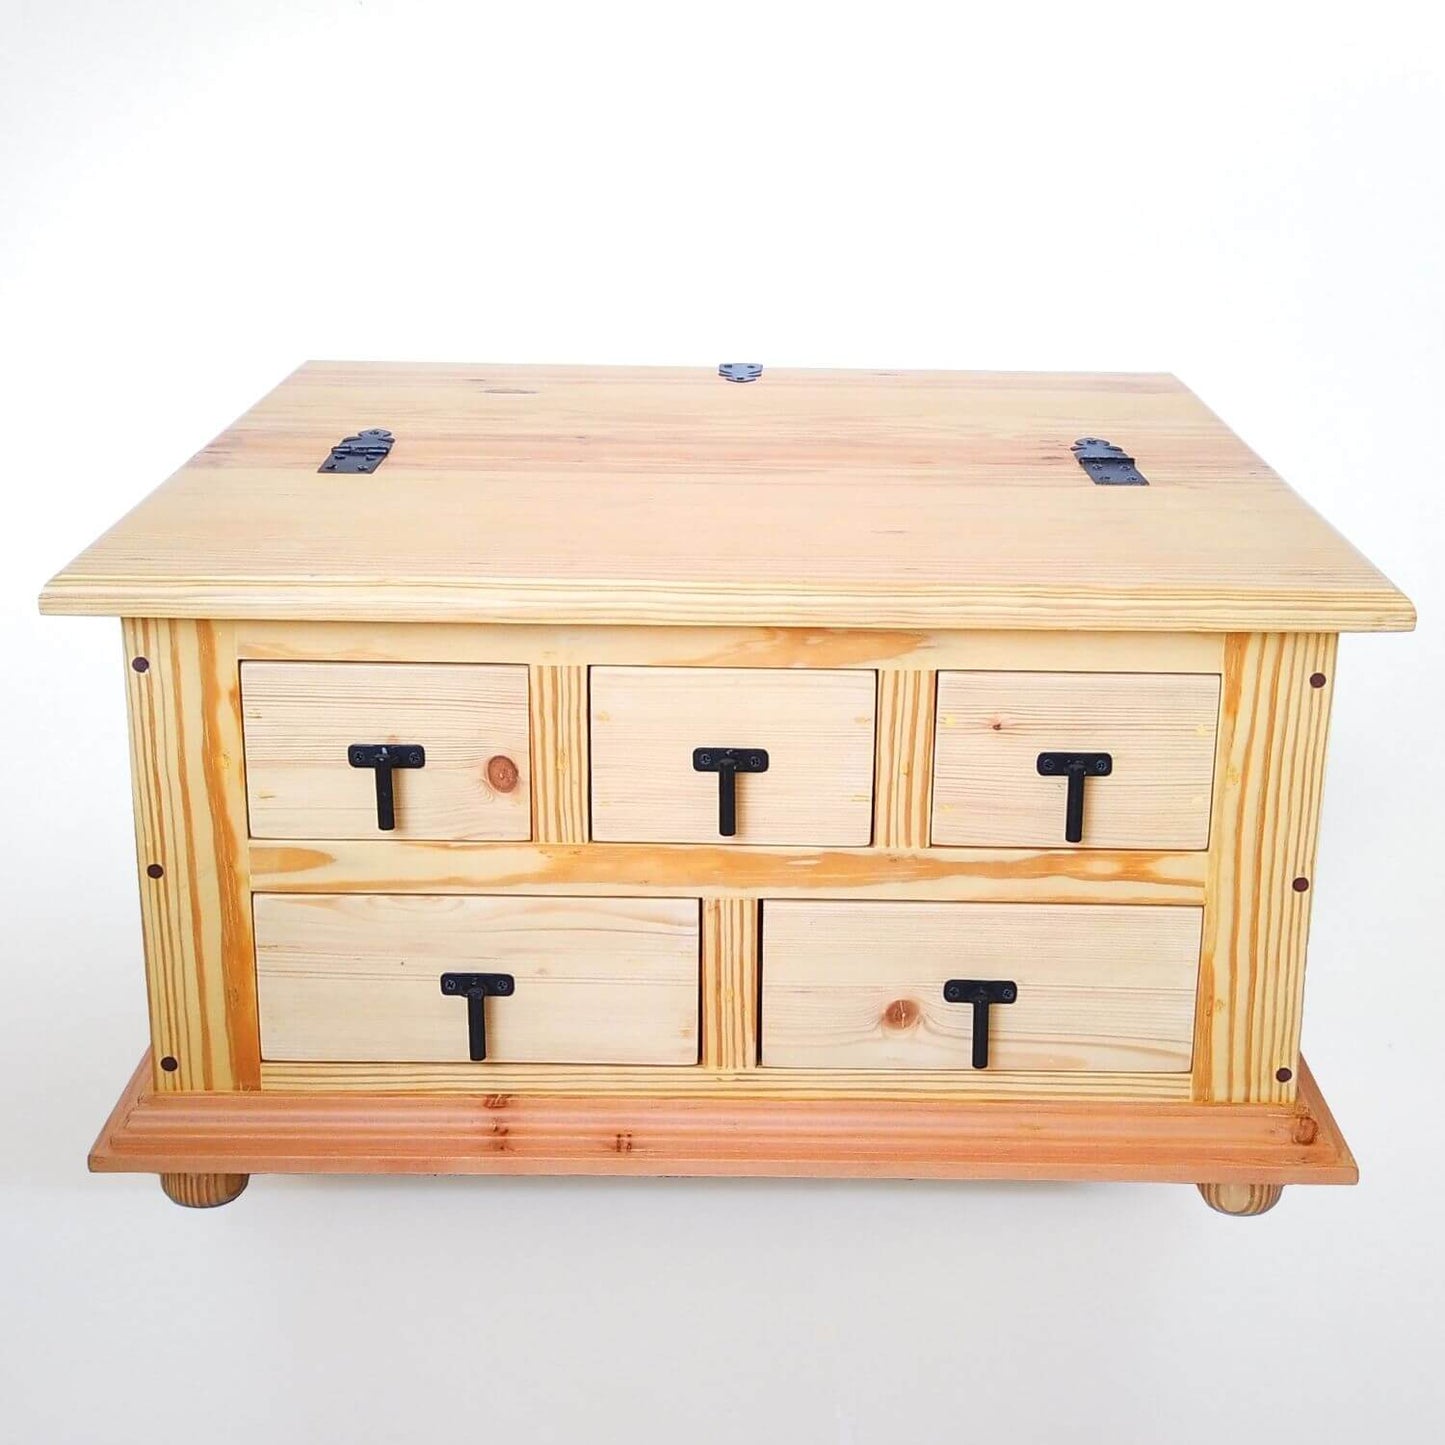 Rustic Square Solid Wood Coffee Table Storage Chest